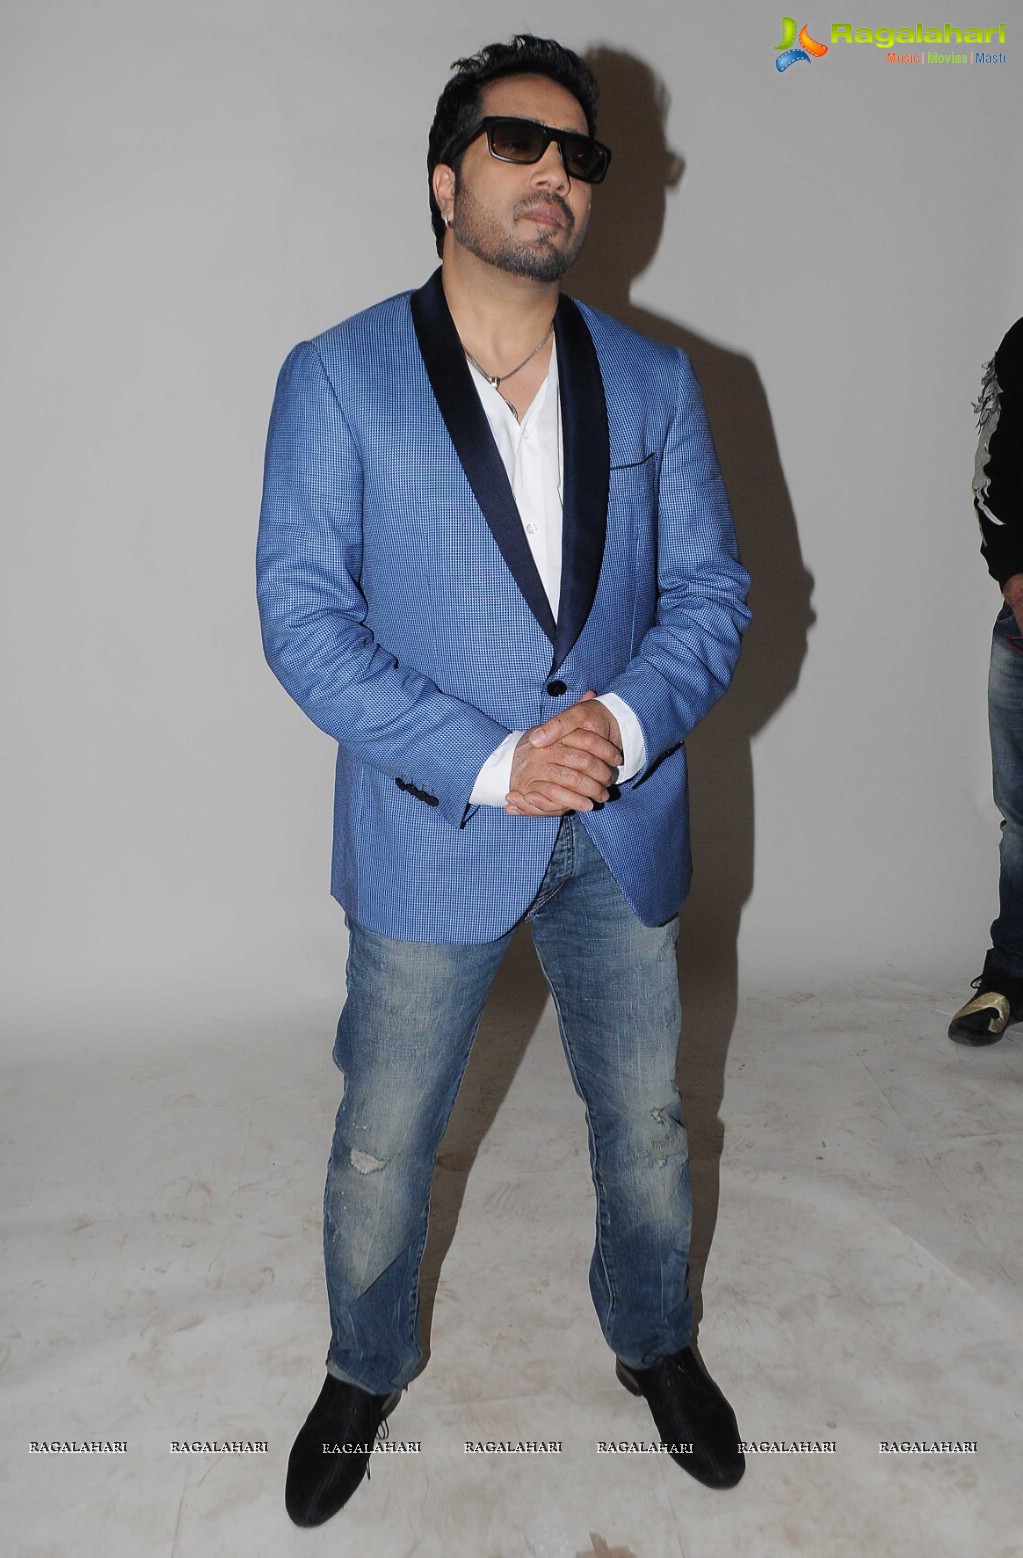 Singer Dilbagh Singh at the photoshoot of album 'BottomsUp' by House of Cheers with Mika Singh